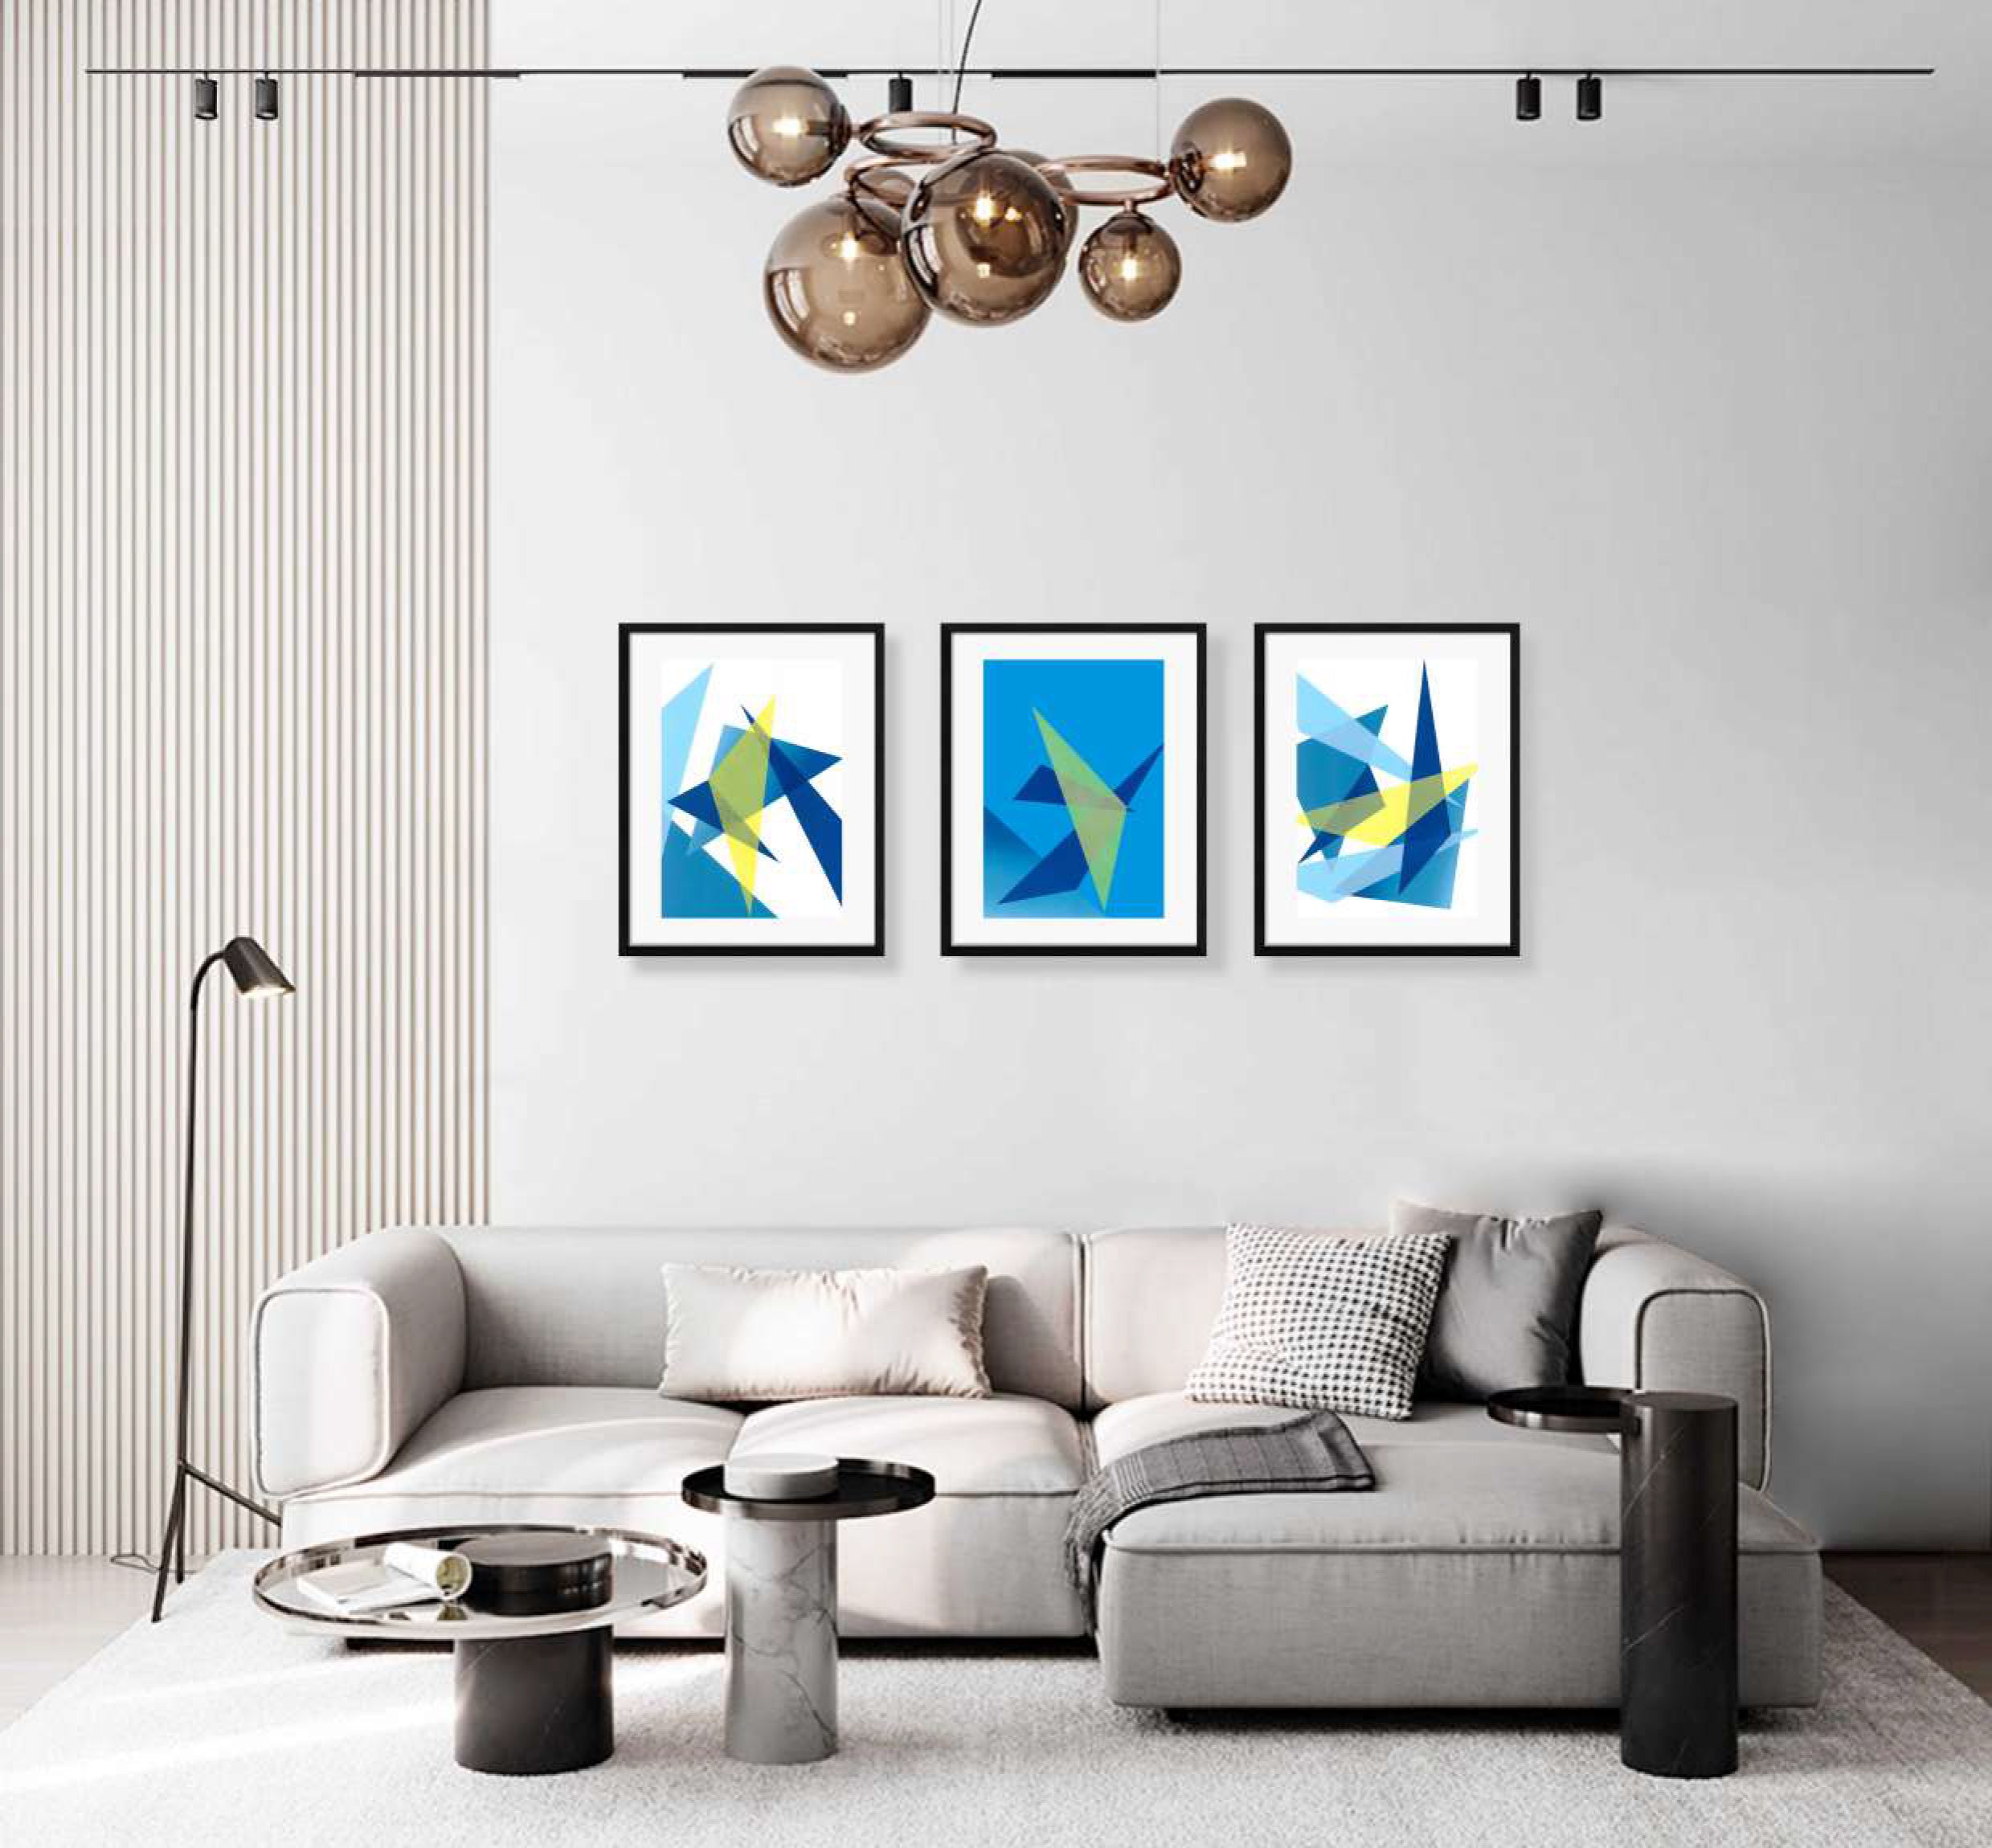 variety collection of framed blue and yellow geometric shaped print interior display